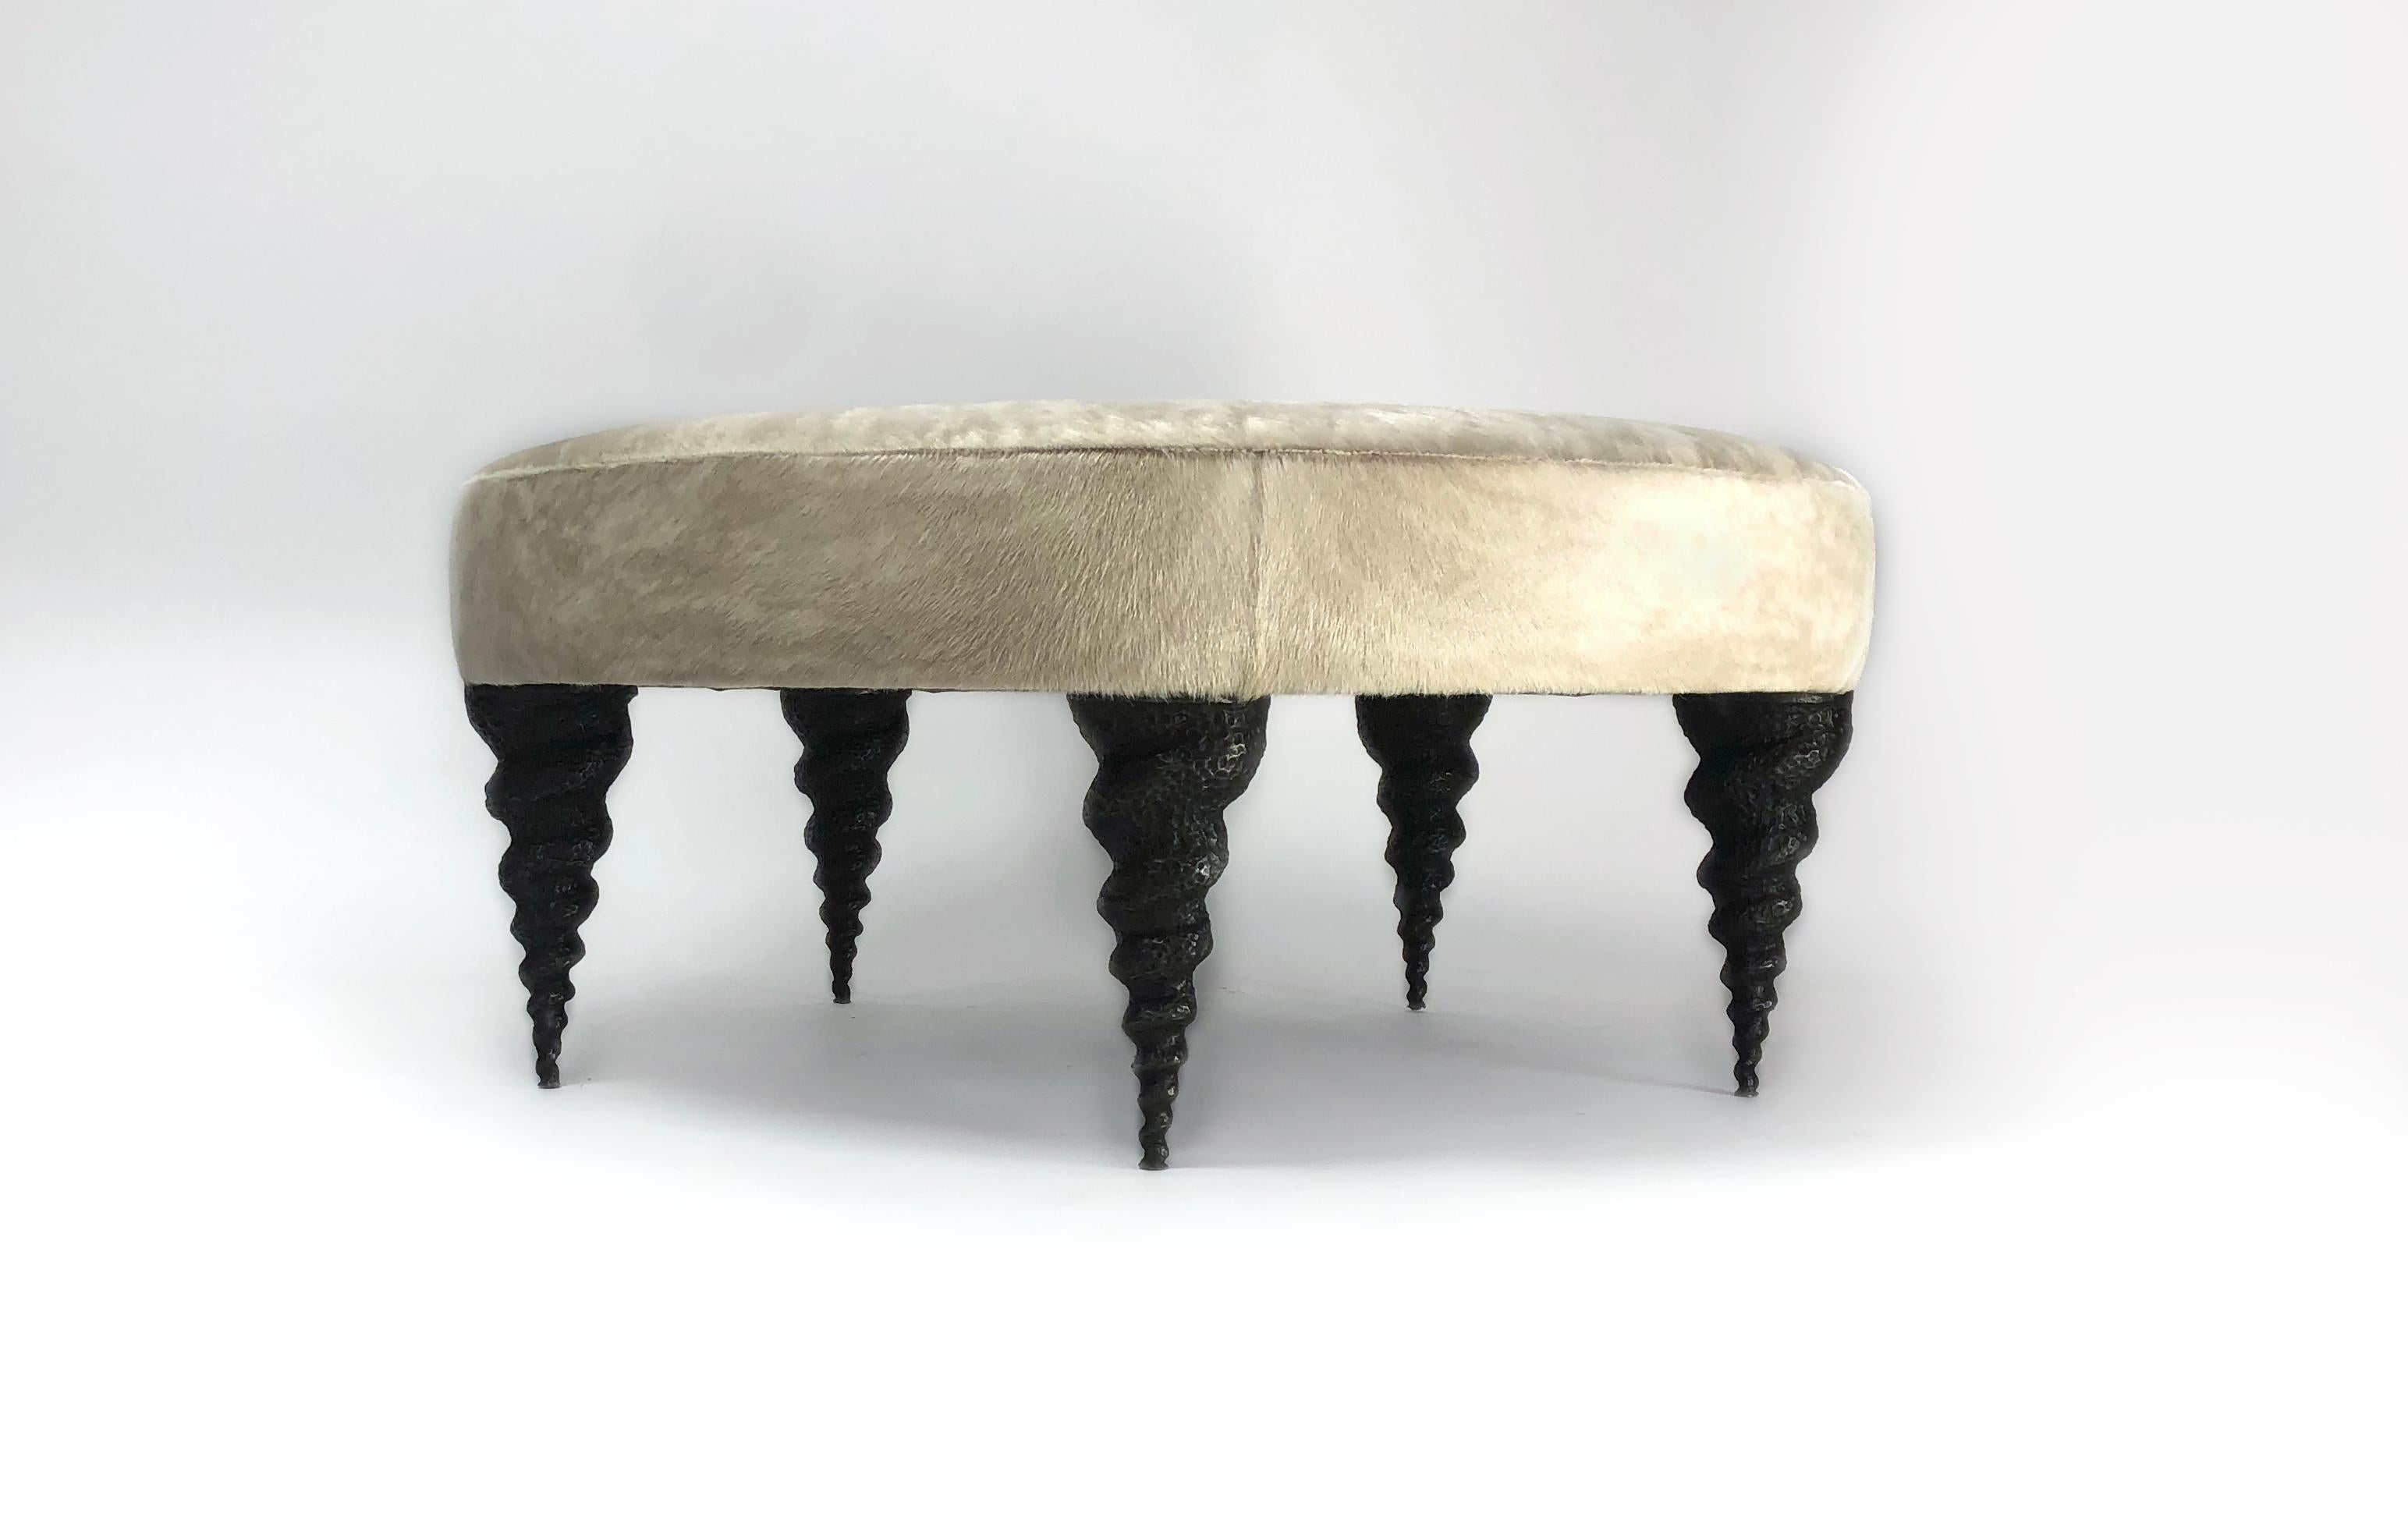 The legs of this ottoman have a biomorphic design. Cast in bronze, the five whimsical legs are inspired by Turrid sea shells. We upholster it to order with your fabric or hide.  Custom dimensions and shapes possible.  Perfect as a coffee table, or